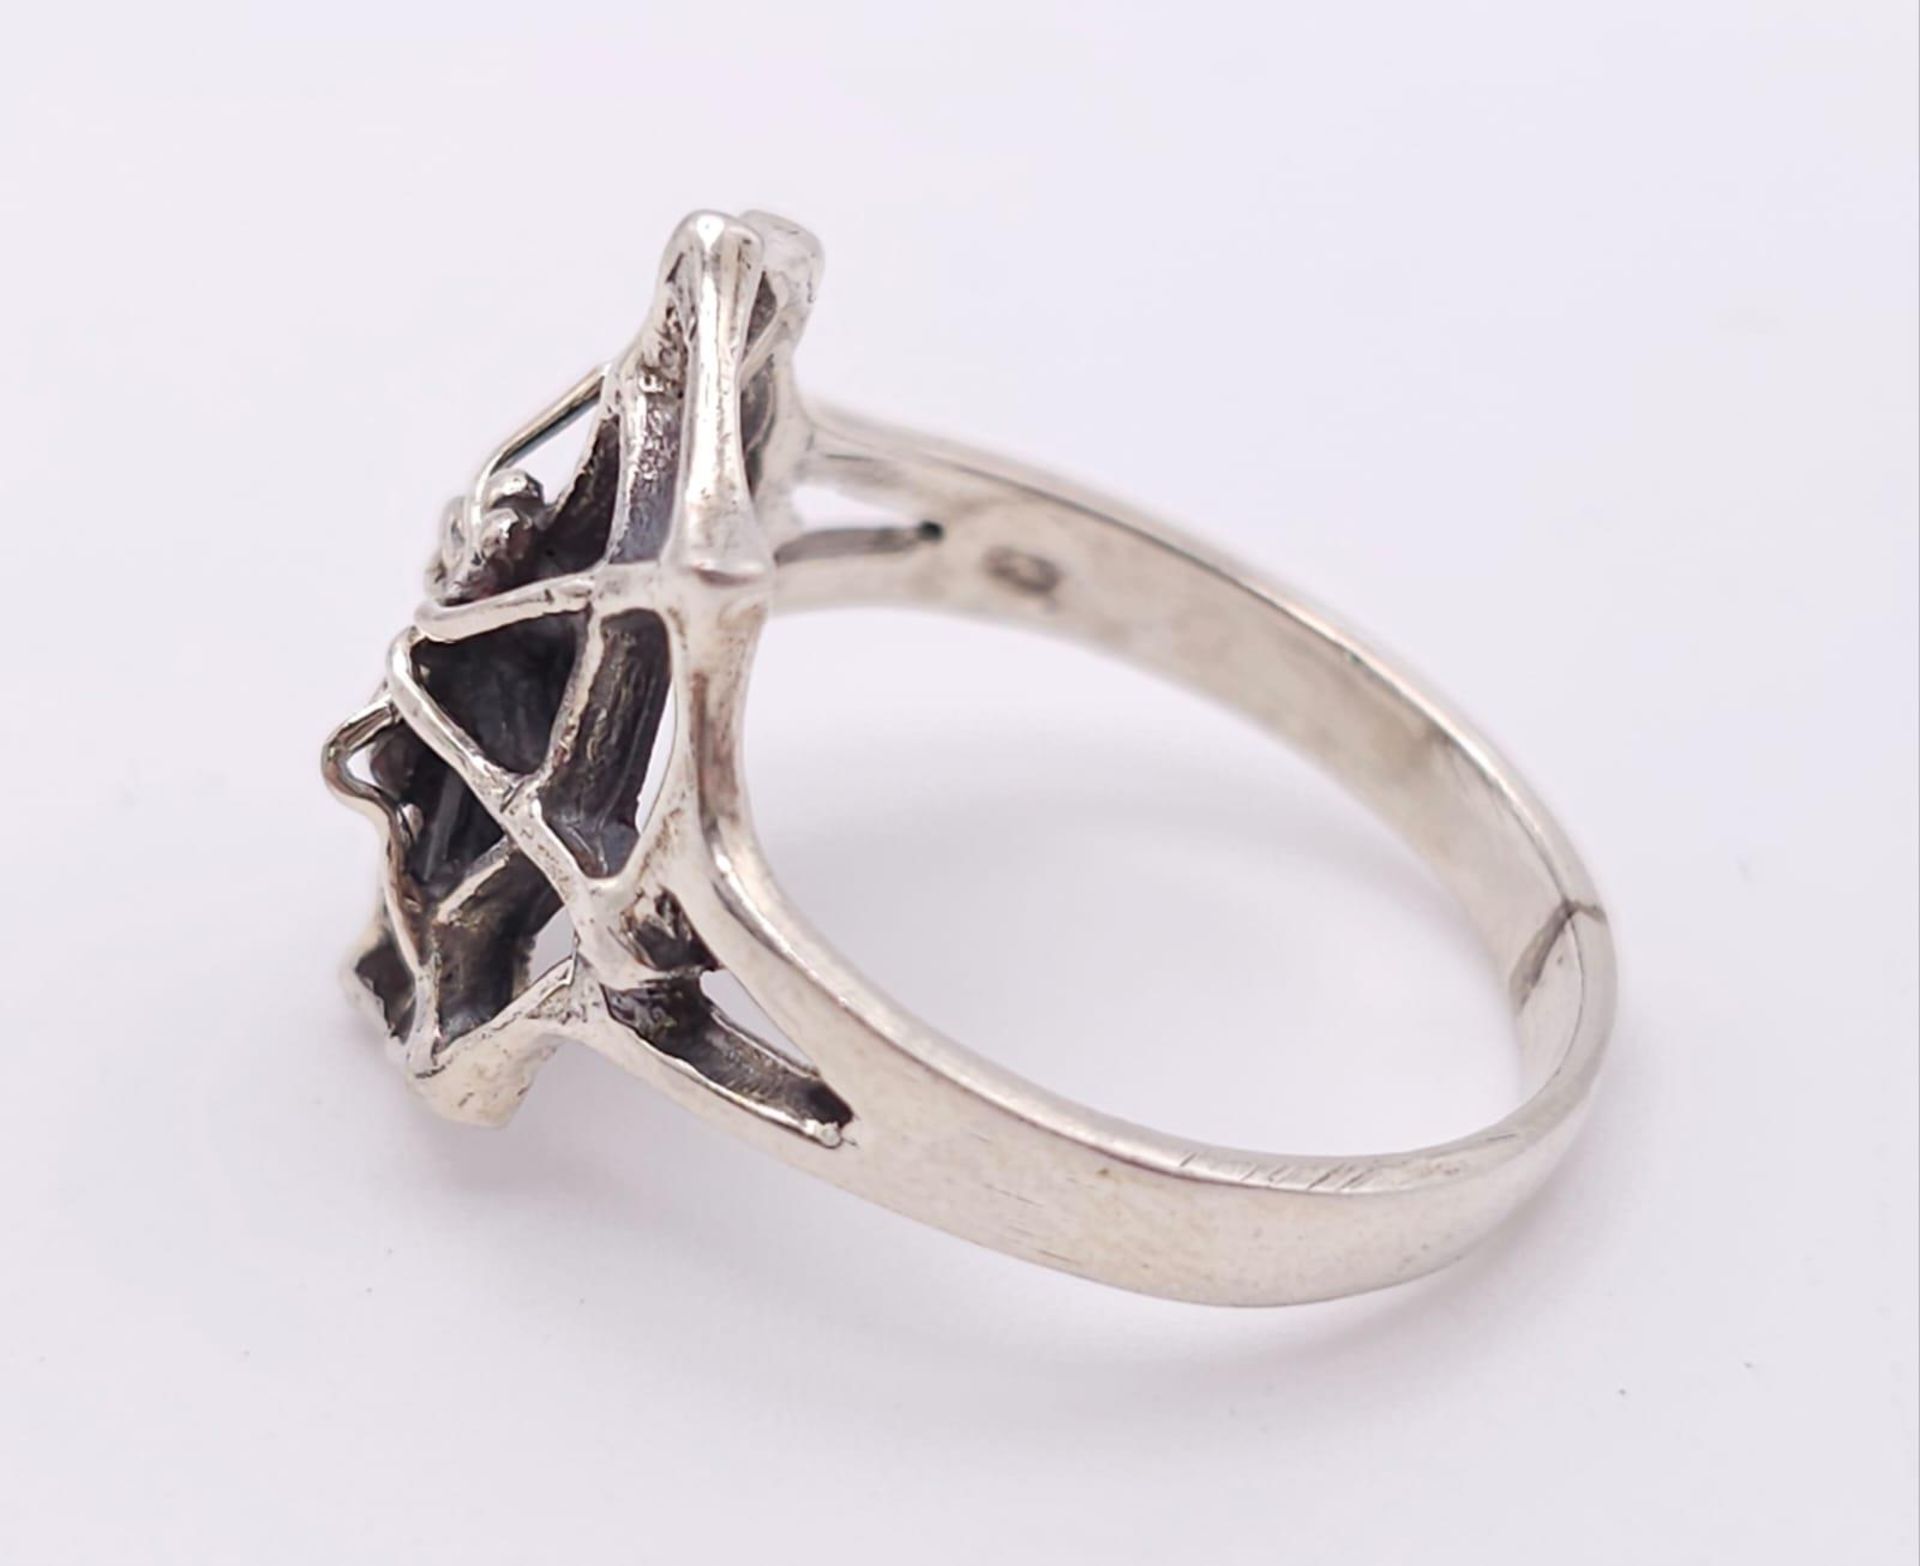 A Unique Vintage Sterling Silver Spider and Spider Web Ring Size Q. The Crown Measures 2cm Long - Image 4 of 9